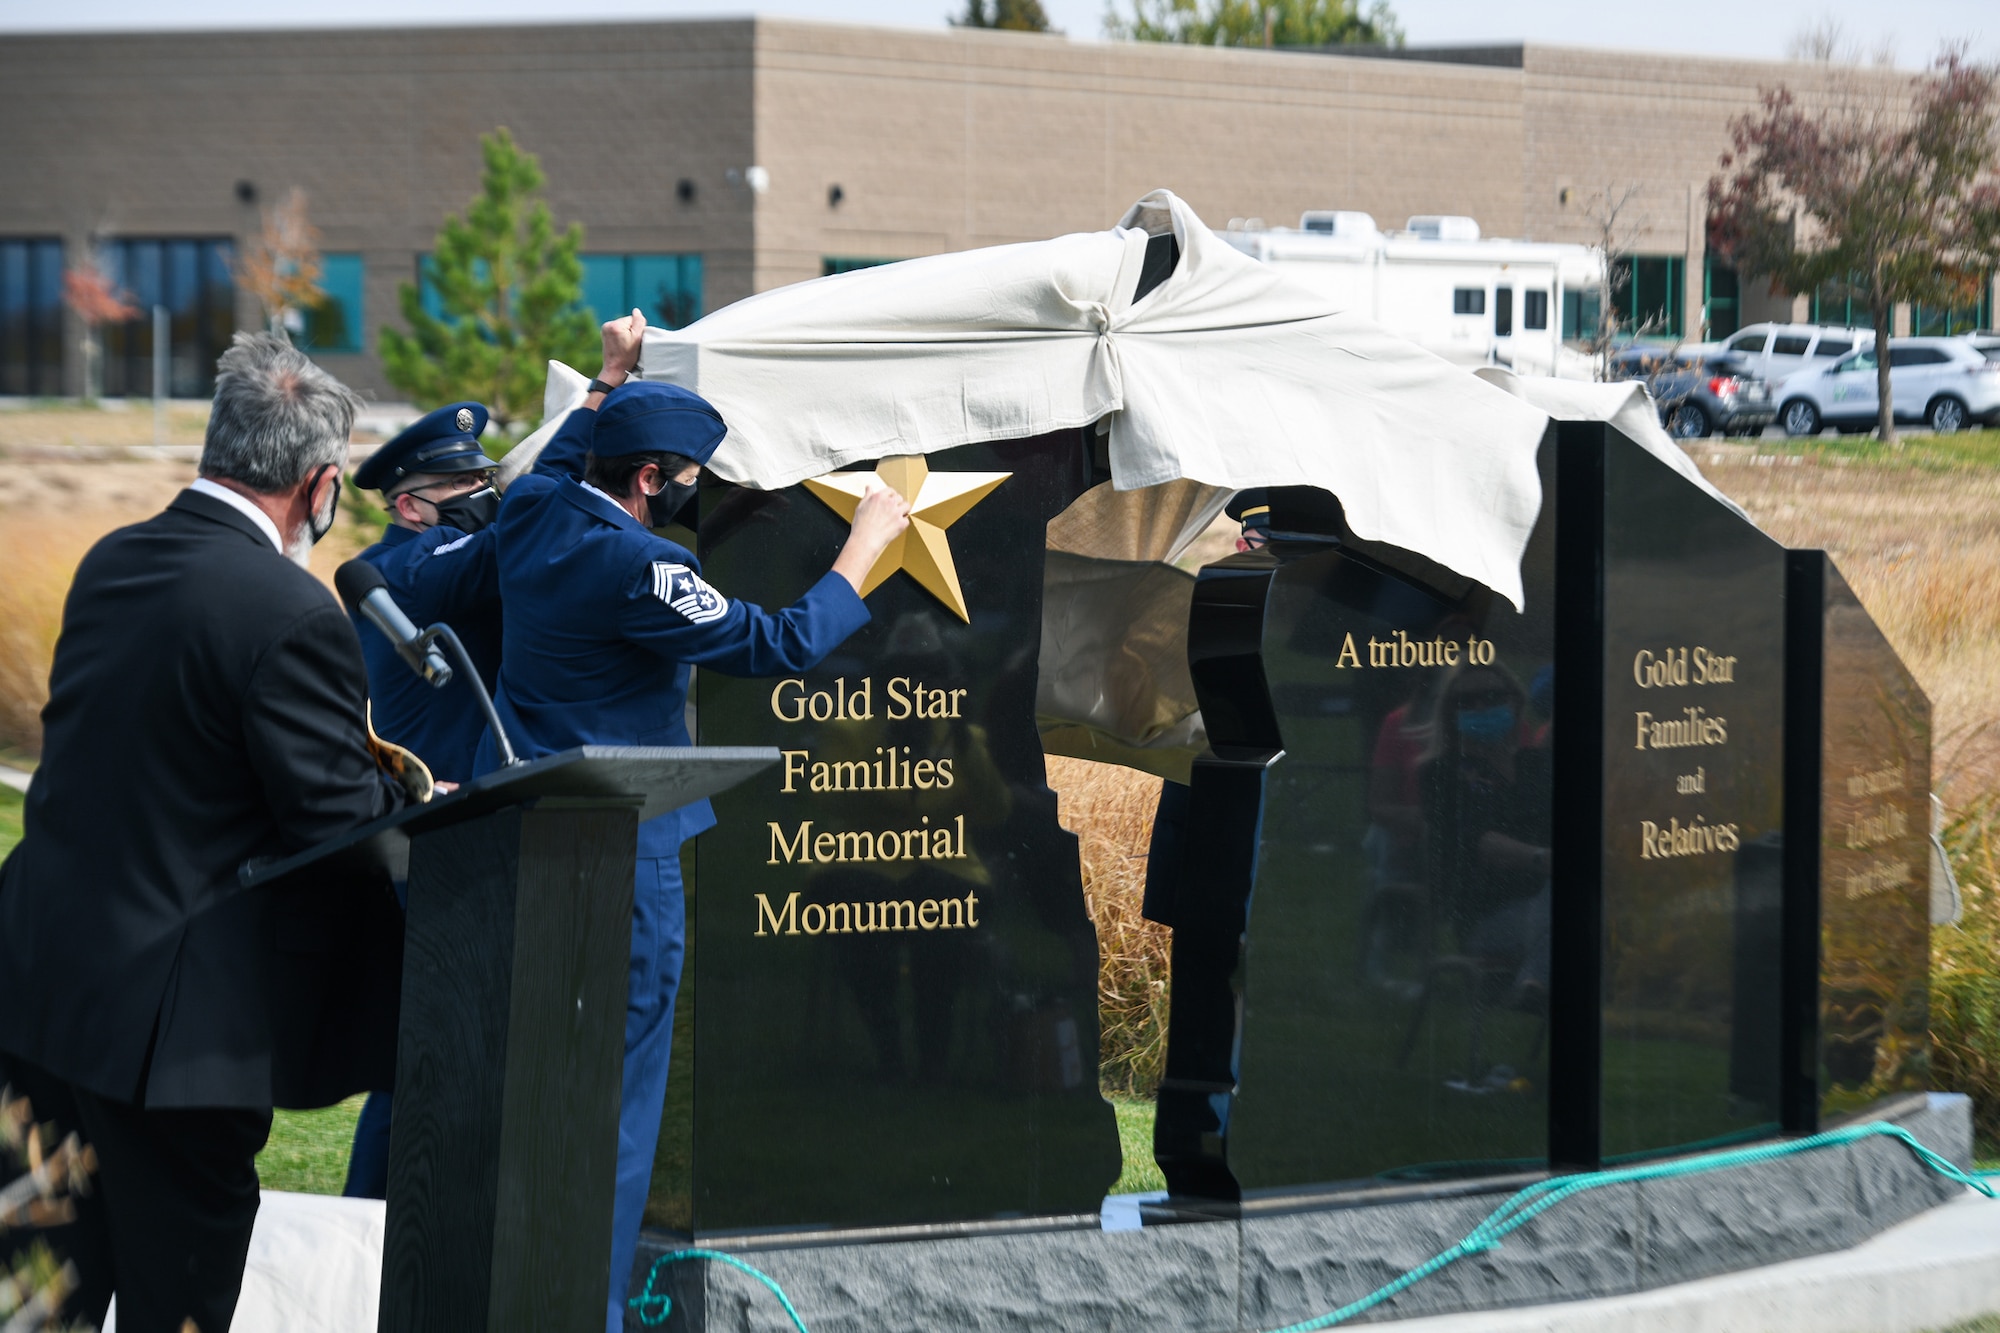 Senior enlisted leaders from Buckley Air Force Base unveil the Gold Star Families Memorial Monument Oct. 14, 2020, at the Colorado Freedom Memorial in Aurora, Colo.